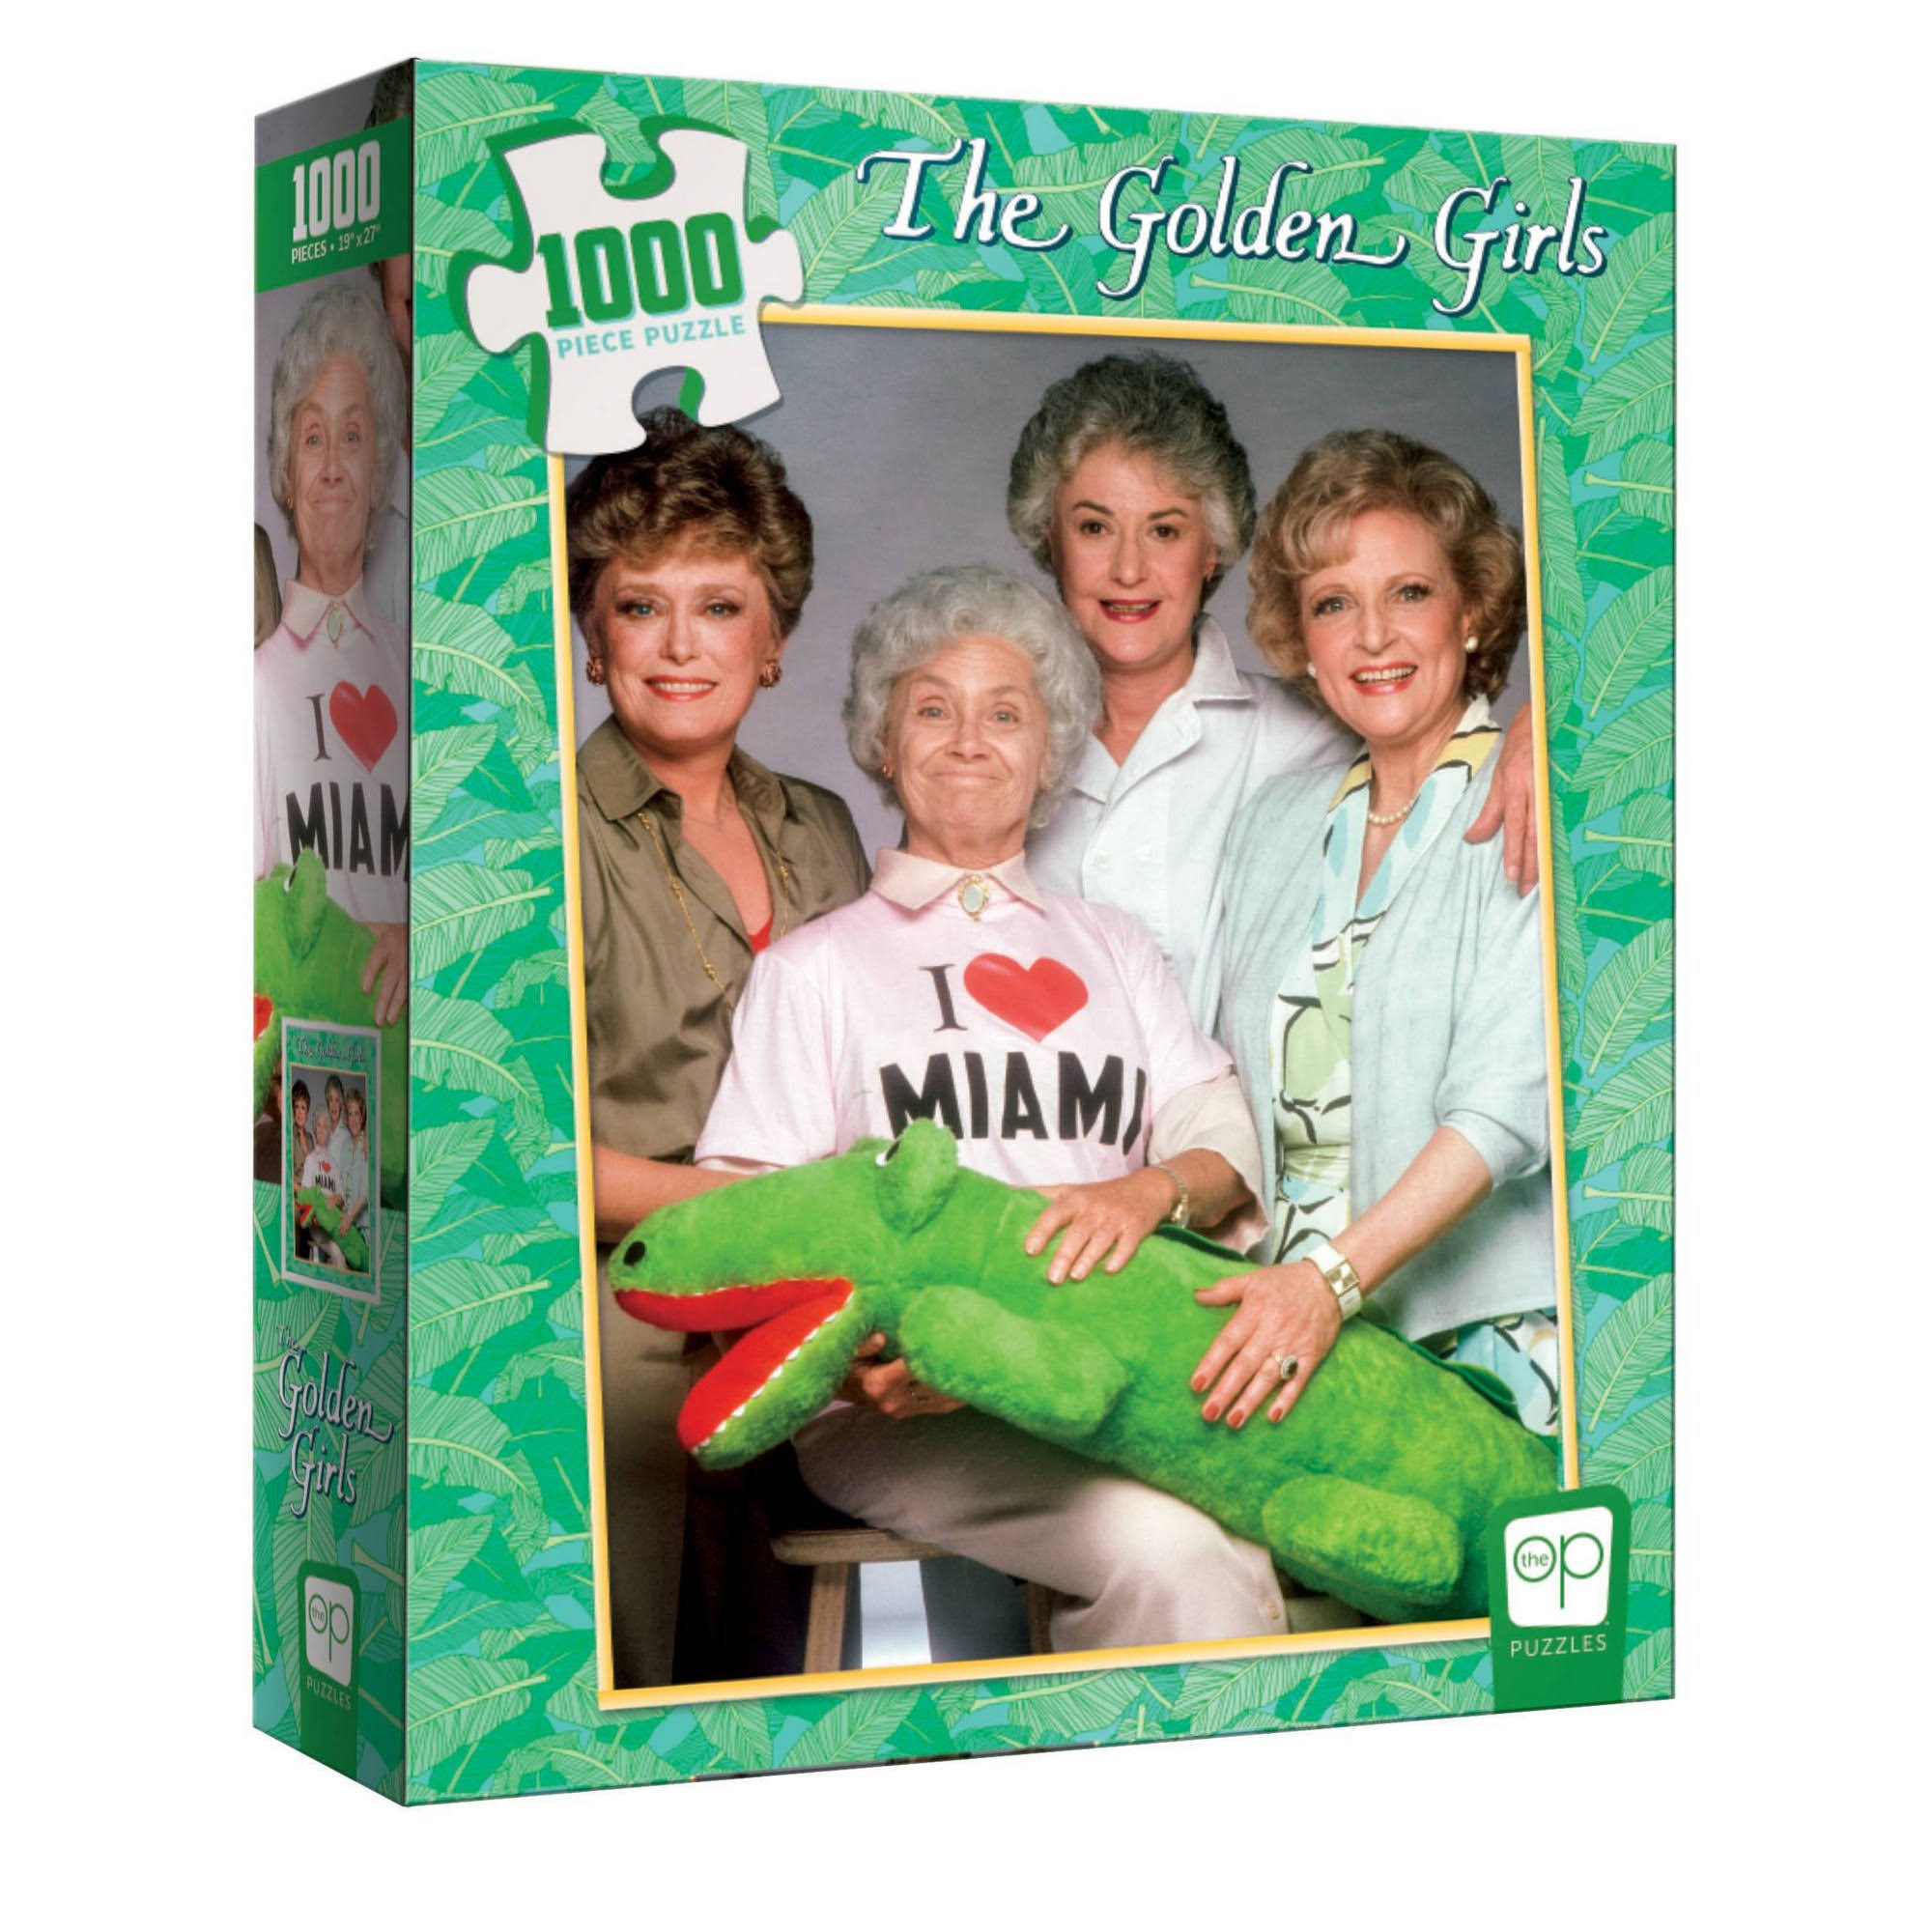 The Golden Girls I Heart Miami 1000 Piece Puzzle